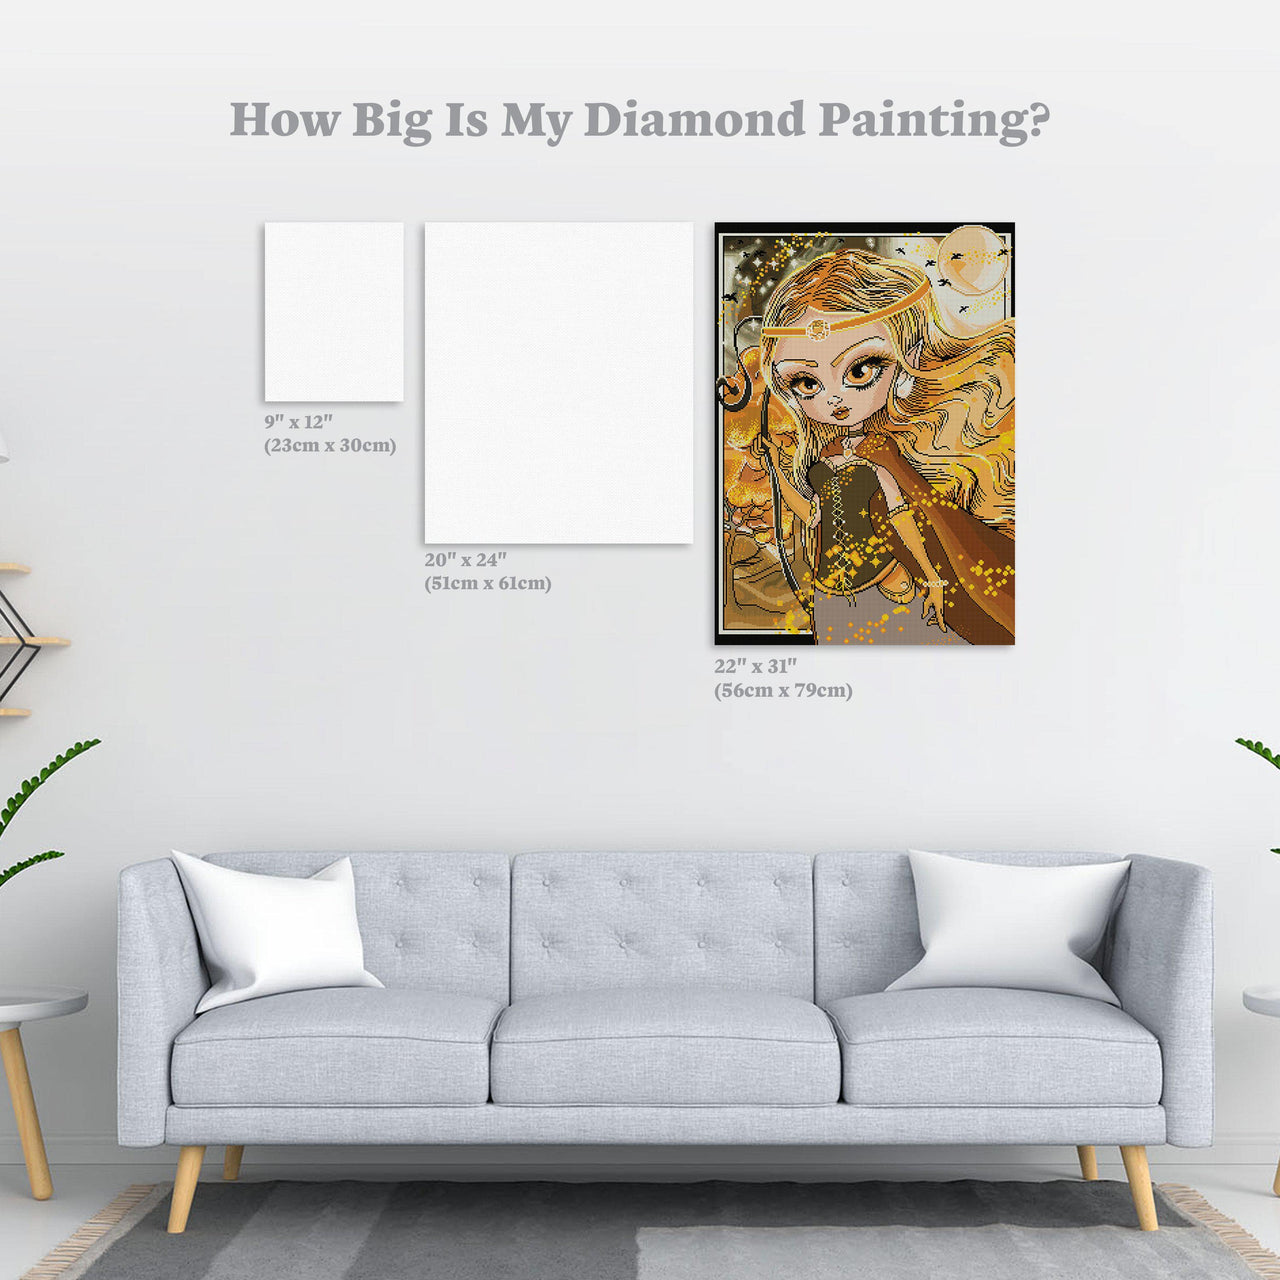 Diamond Painting Amber Starlight 22" x 31″ (56cm x 79cm) / Square with 40 Colors including 2 ABs